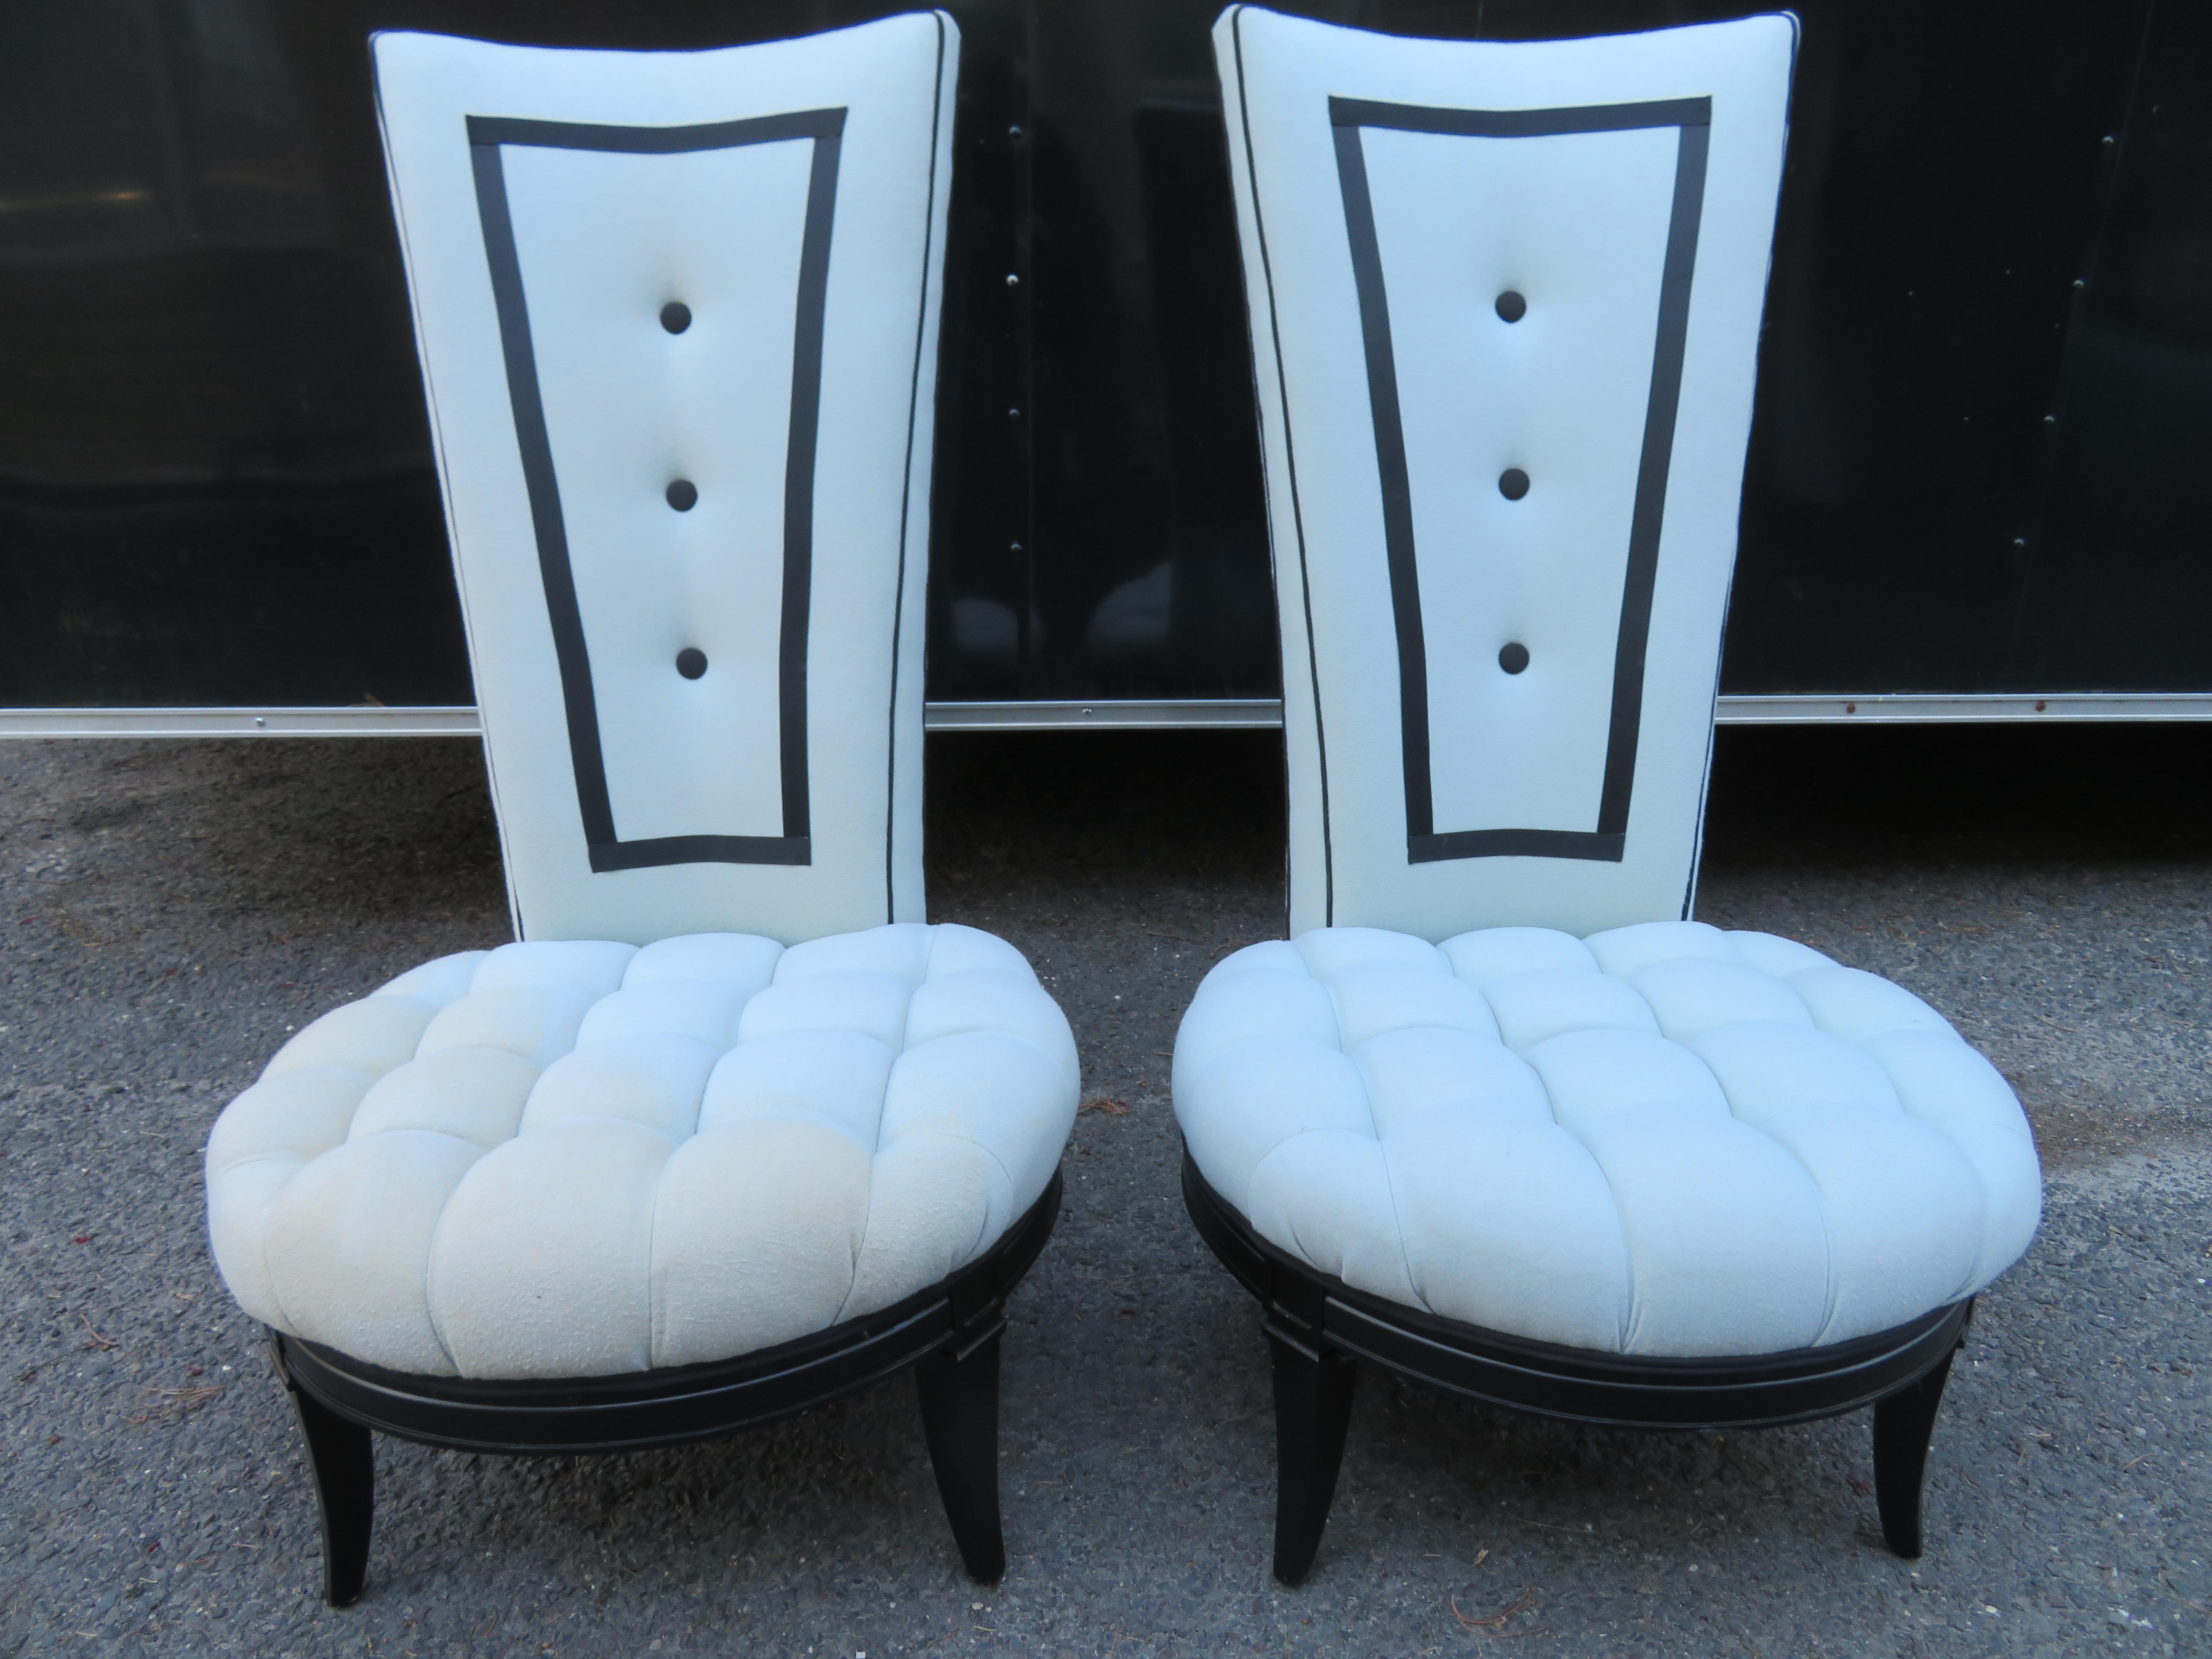 Handsome pair tuxedo style tall back slipper chairs with gorgeous wide tufted seats. These were re-upholstered about 10 years ago by a high end designer and the frames were lacquered black. One chair shows more wear than the other with spot and